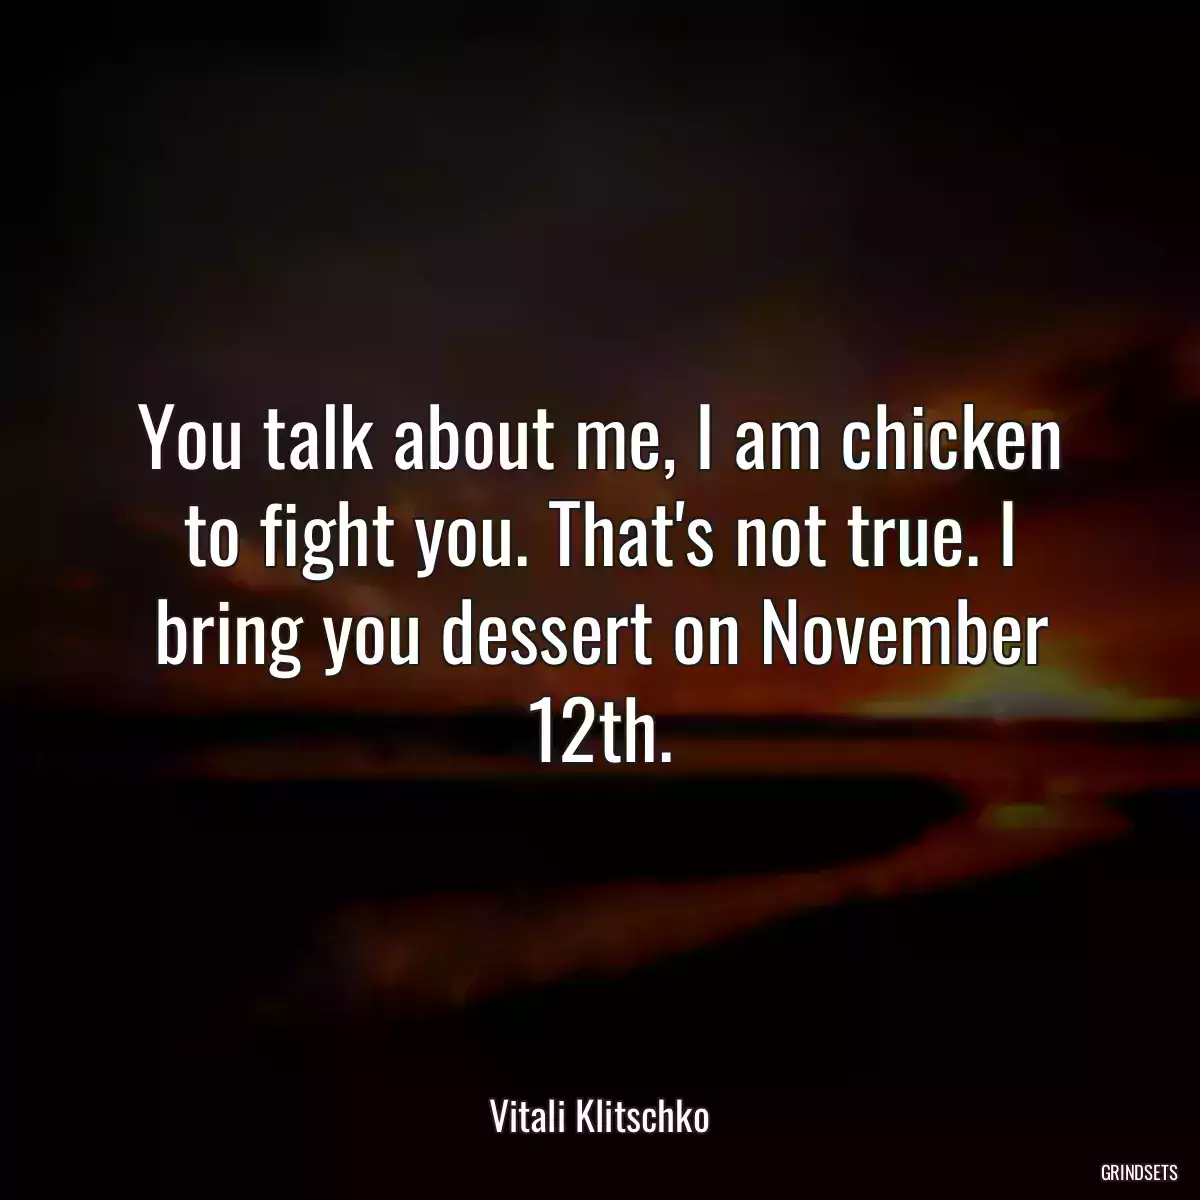 You talk about me, I am chicken to fight you. That\'s not true. I bring you dessert on November 12th.